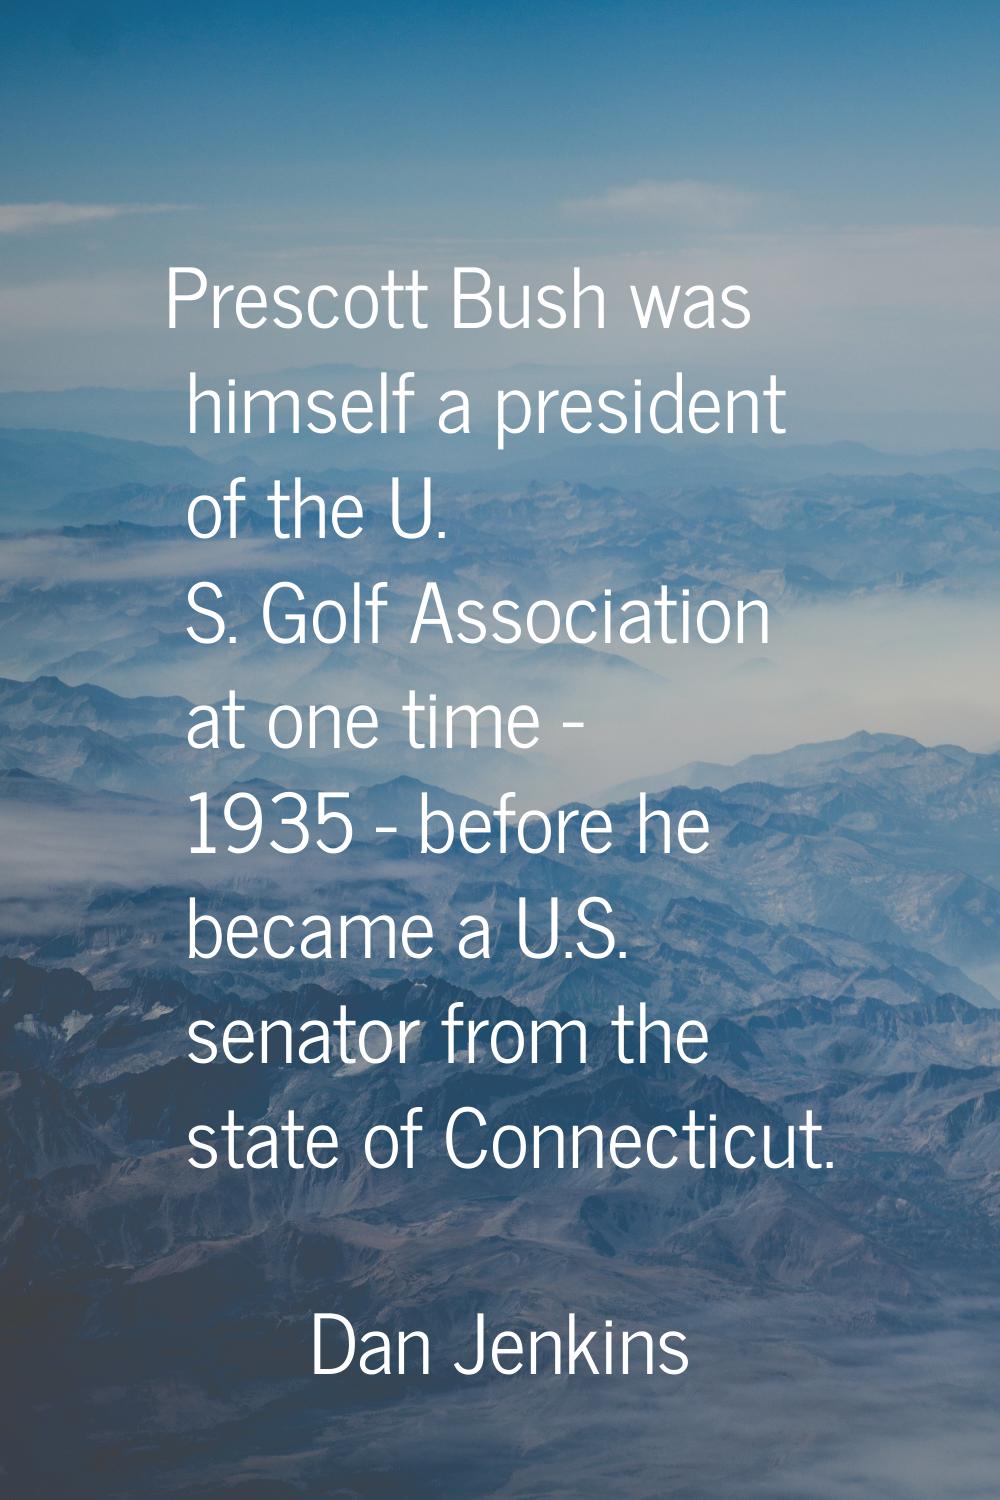 Prescott Bush was himself a president of the U. S. Golf Association at one time - 1935 - before he 